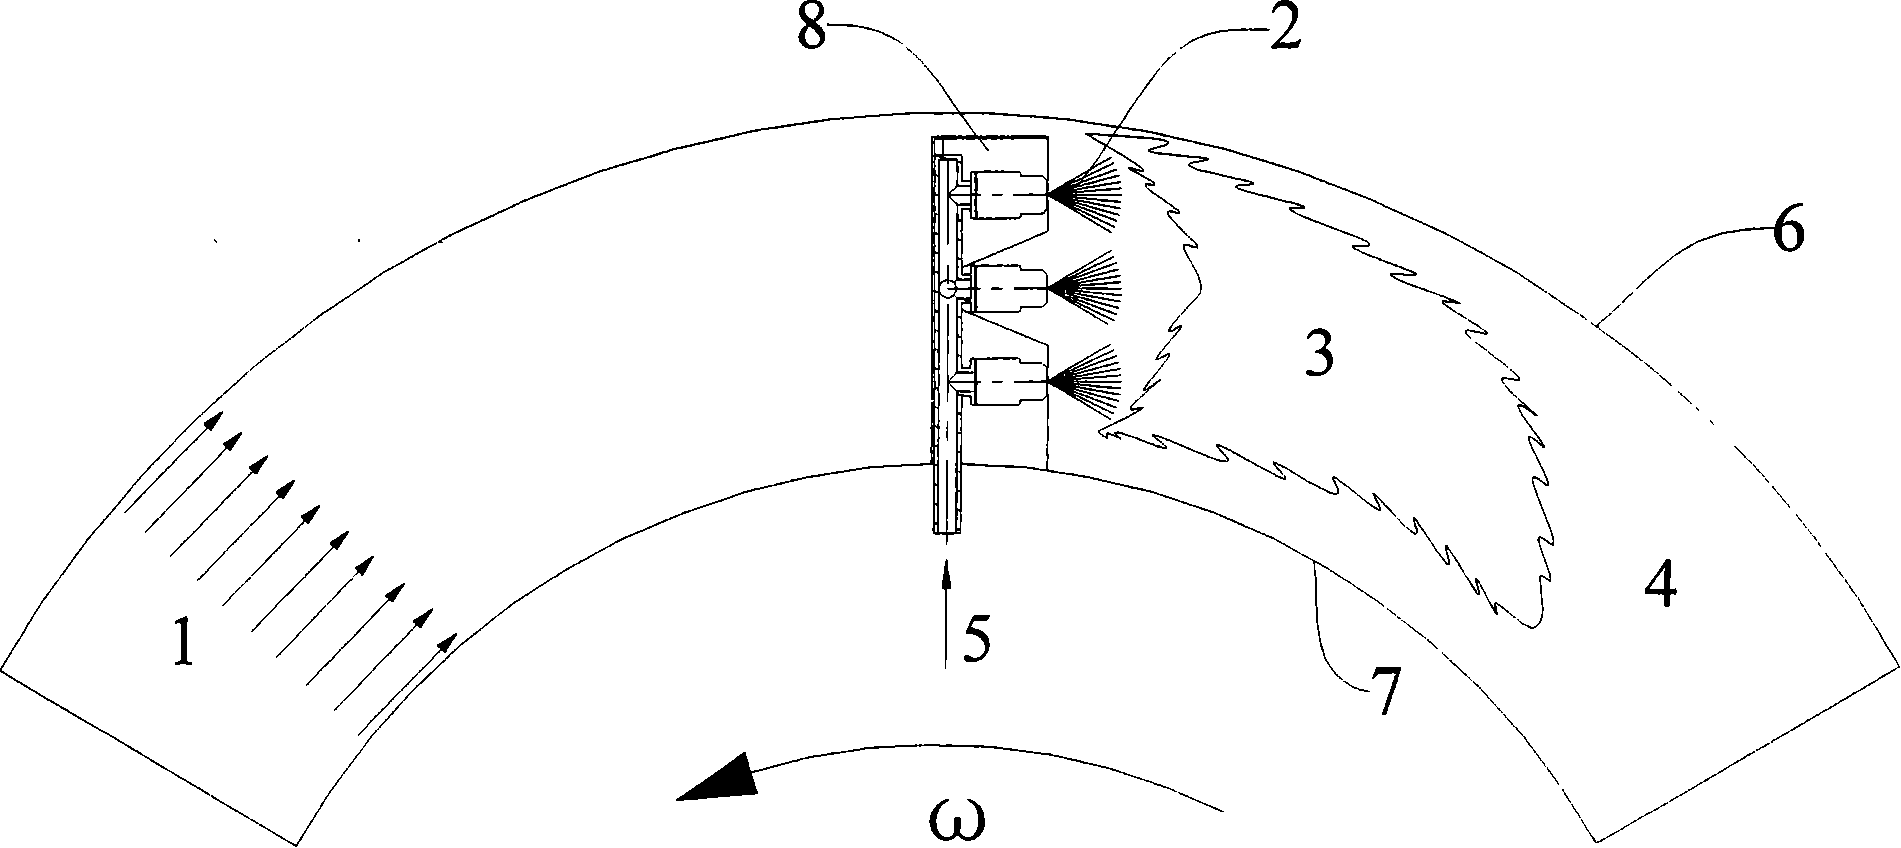 Cross flame holder for rotor engine